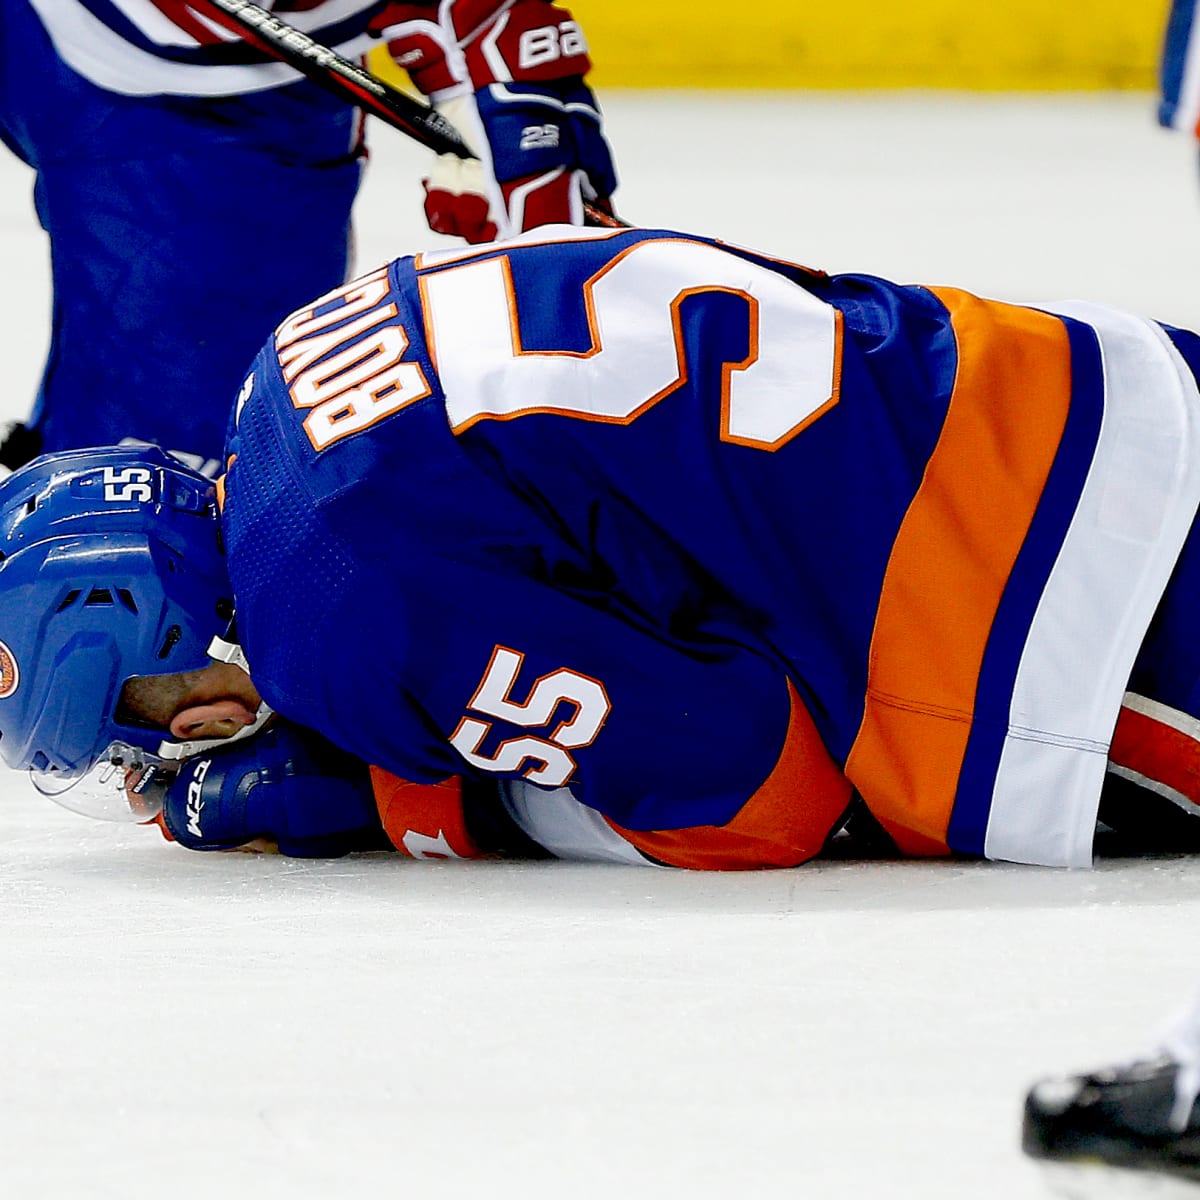 NHL's Johnny Boychuk Slashed In Eye With Skate, Took 90 Stitches To Repair